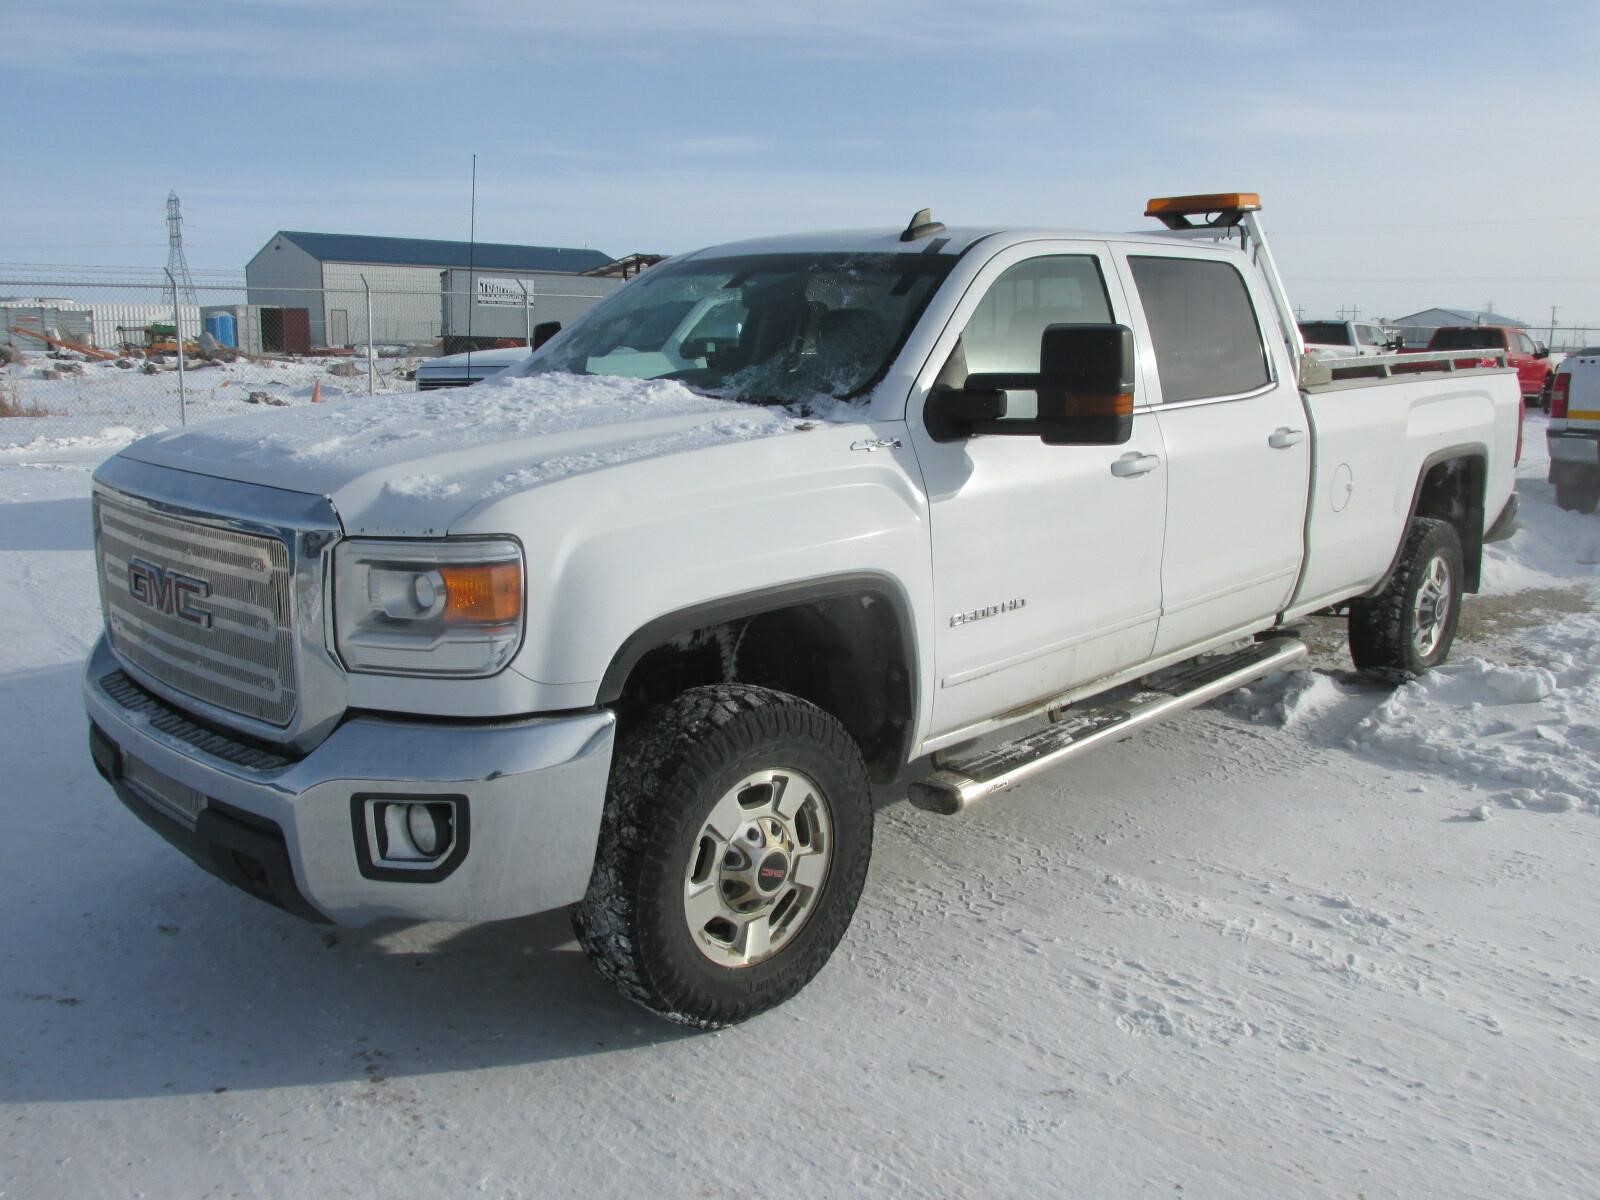 Online Auto Auction March 1 2021 Featuring MTS/Bell Canada